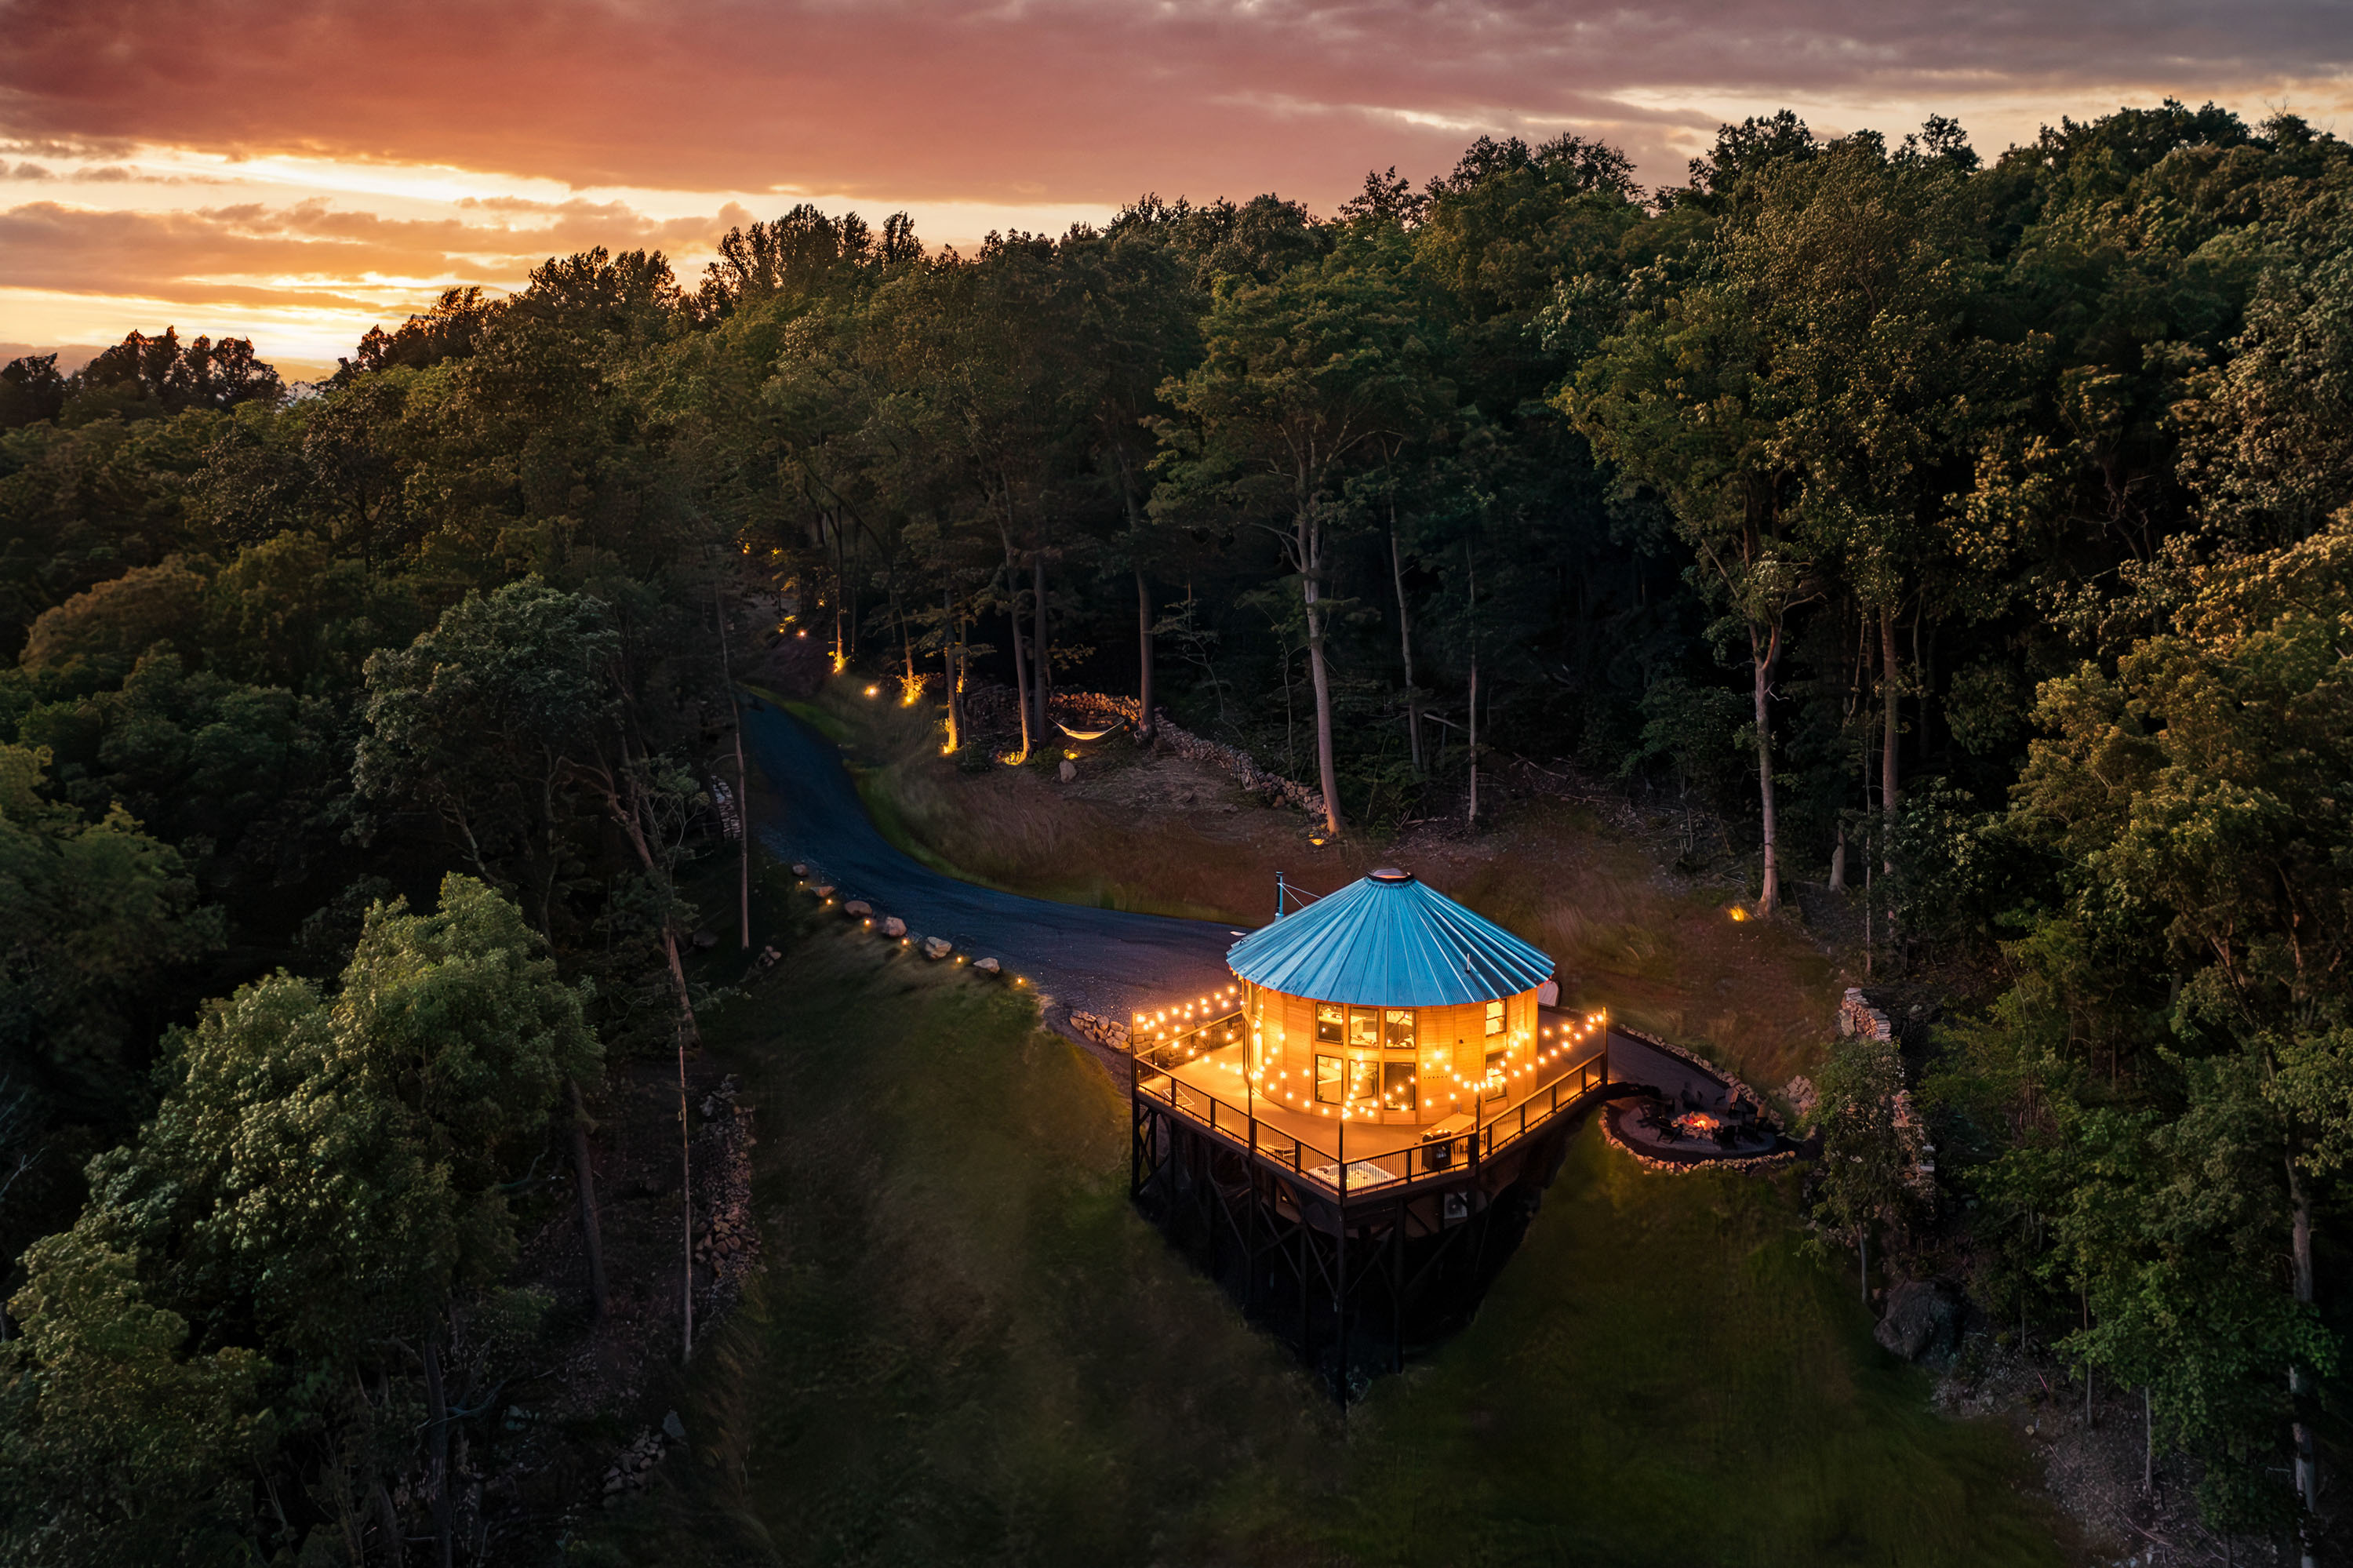 <span  class="uc_style_uc_tiles_grid_image_elementor_uc_items_attribute_title" style="color:#ffffff;">Drone aerial photo, Blue Ridge Mountains View - Skyline Yurt</span>